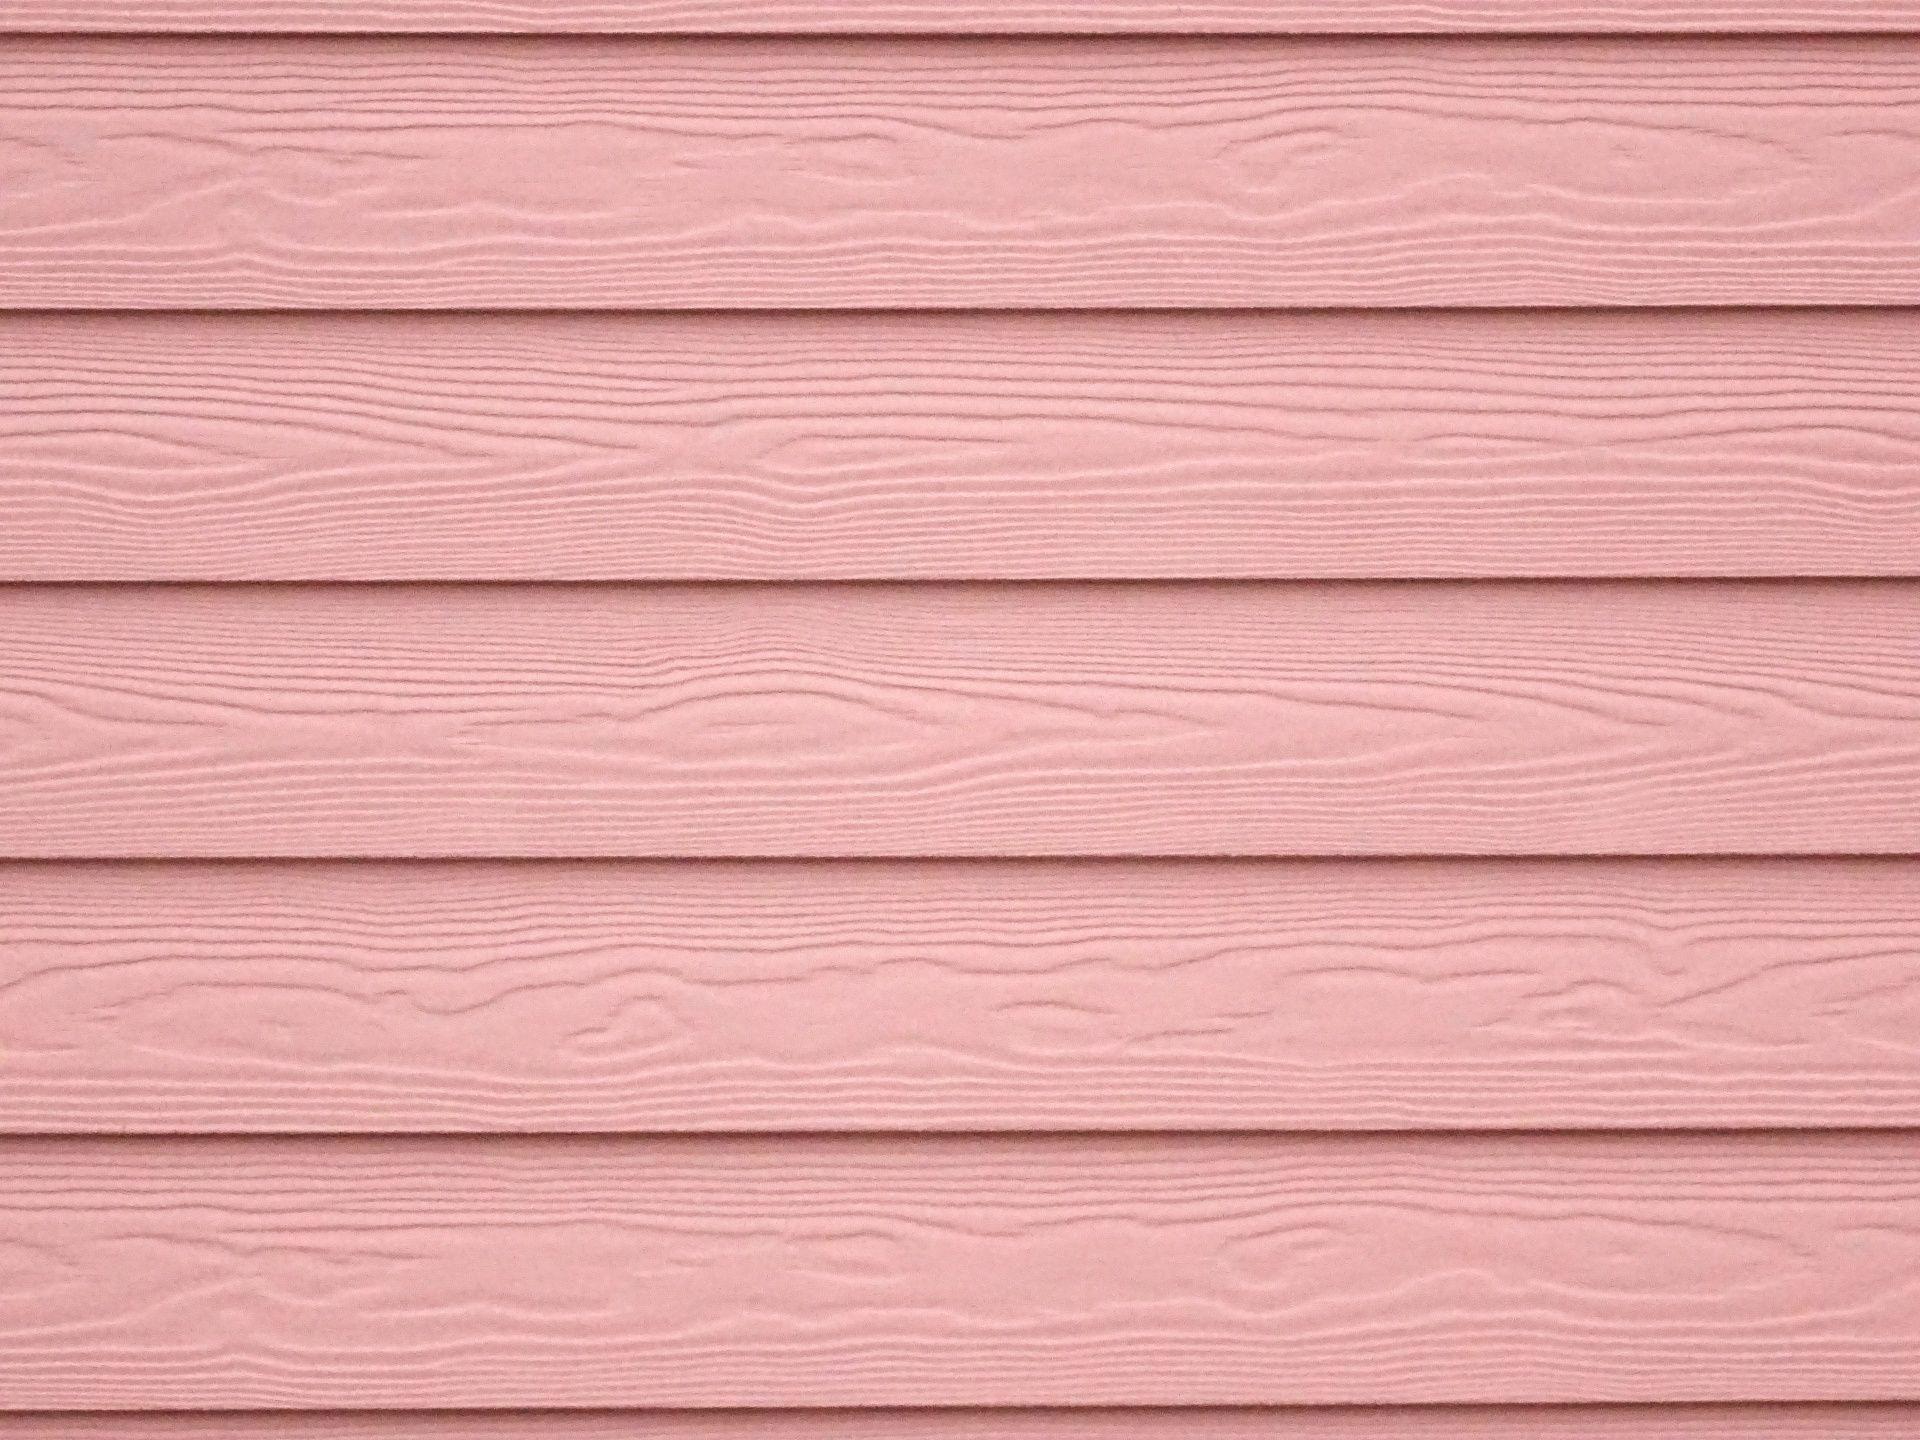 Peach Wood Texture Wallpaper Free Domain Picture